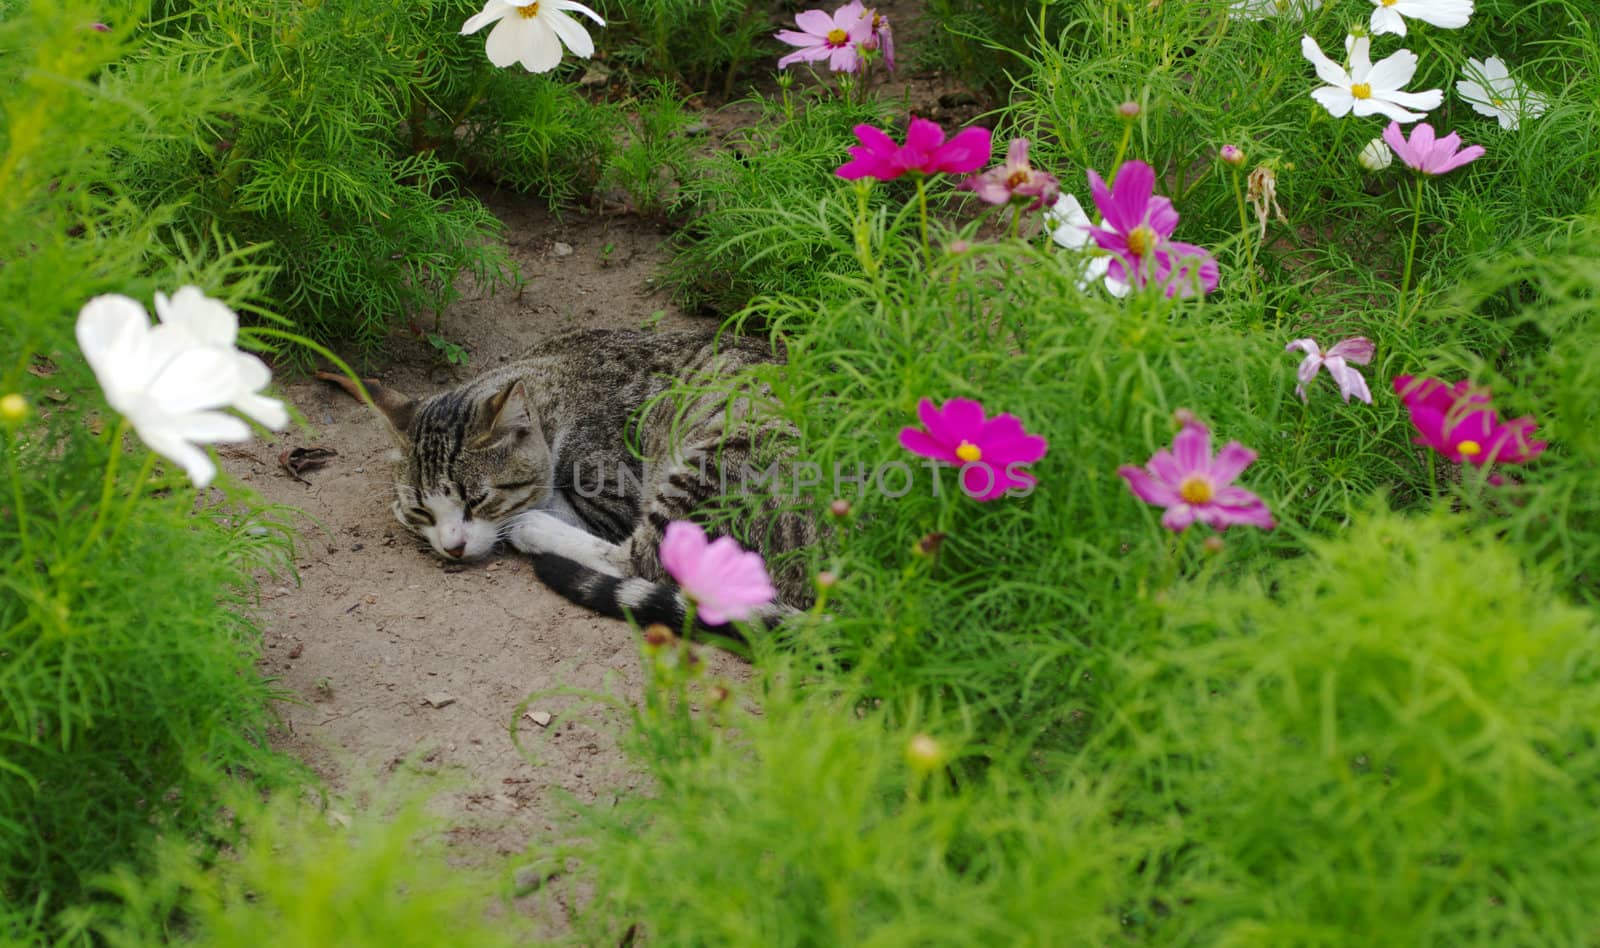 Stray cat is sleeping in between flowers in a public park (Selective Focus)